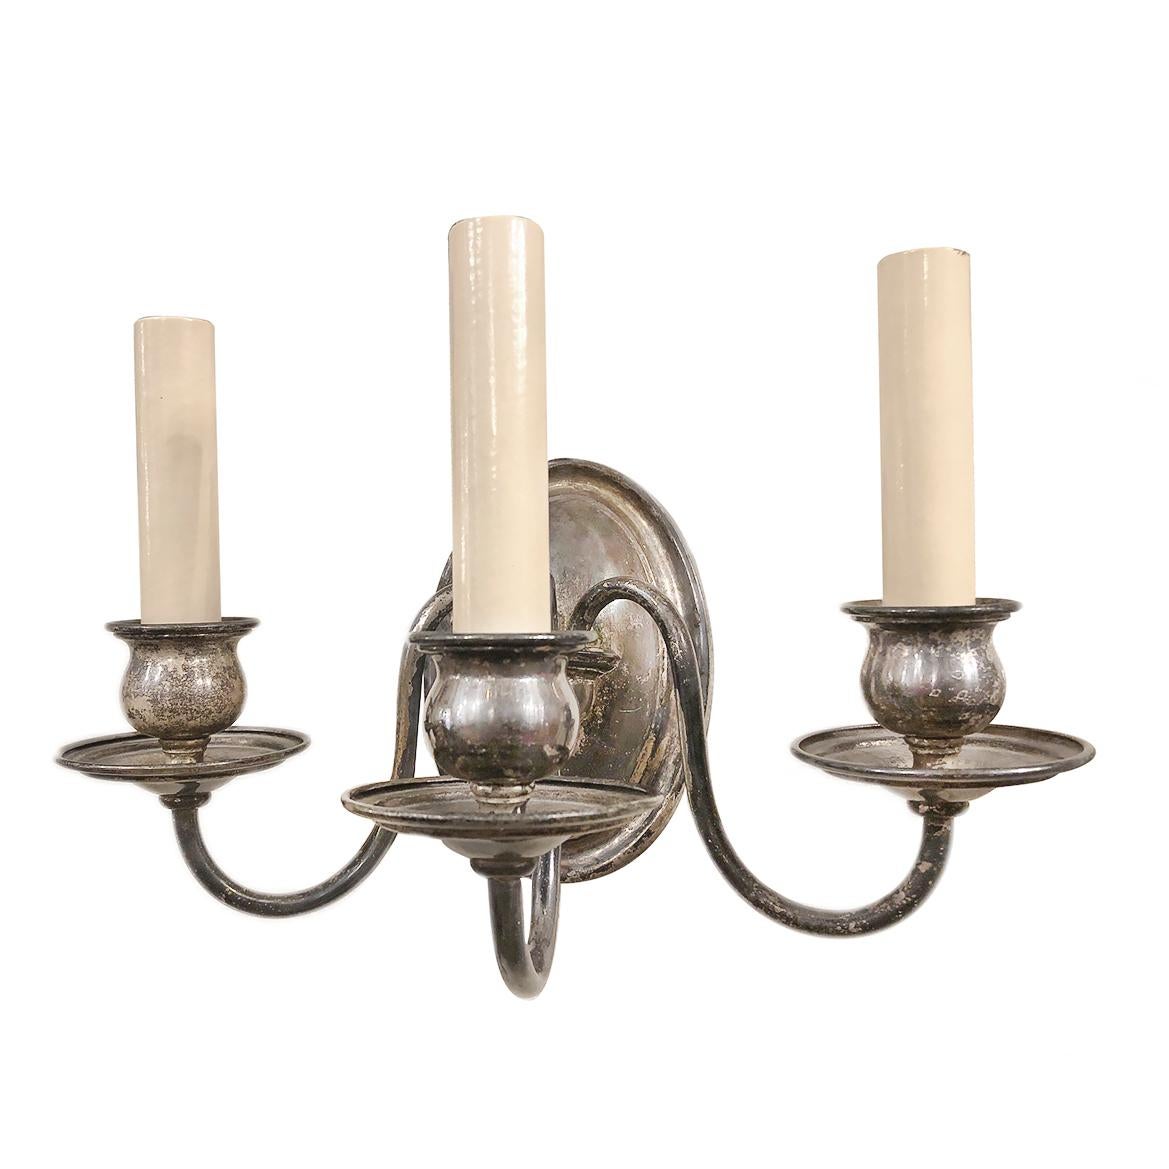 A pair of circa 1920's English silver plated three-light sconces.

Measurements:
Height: 7